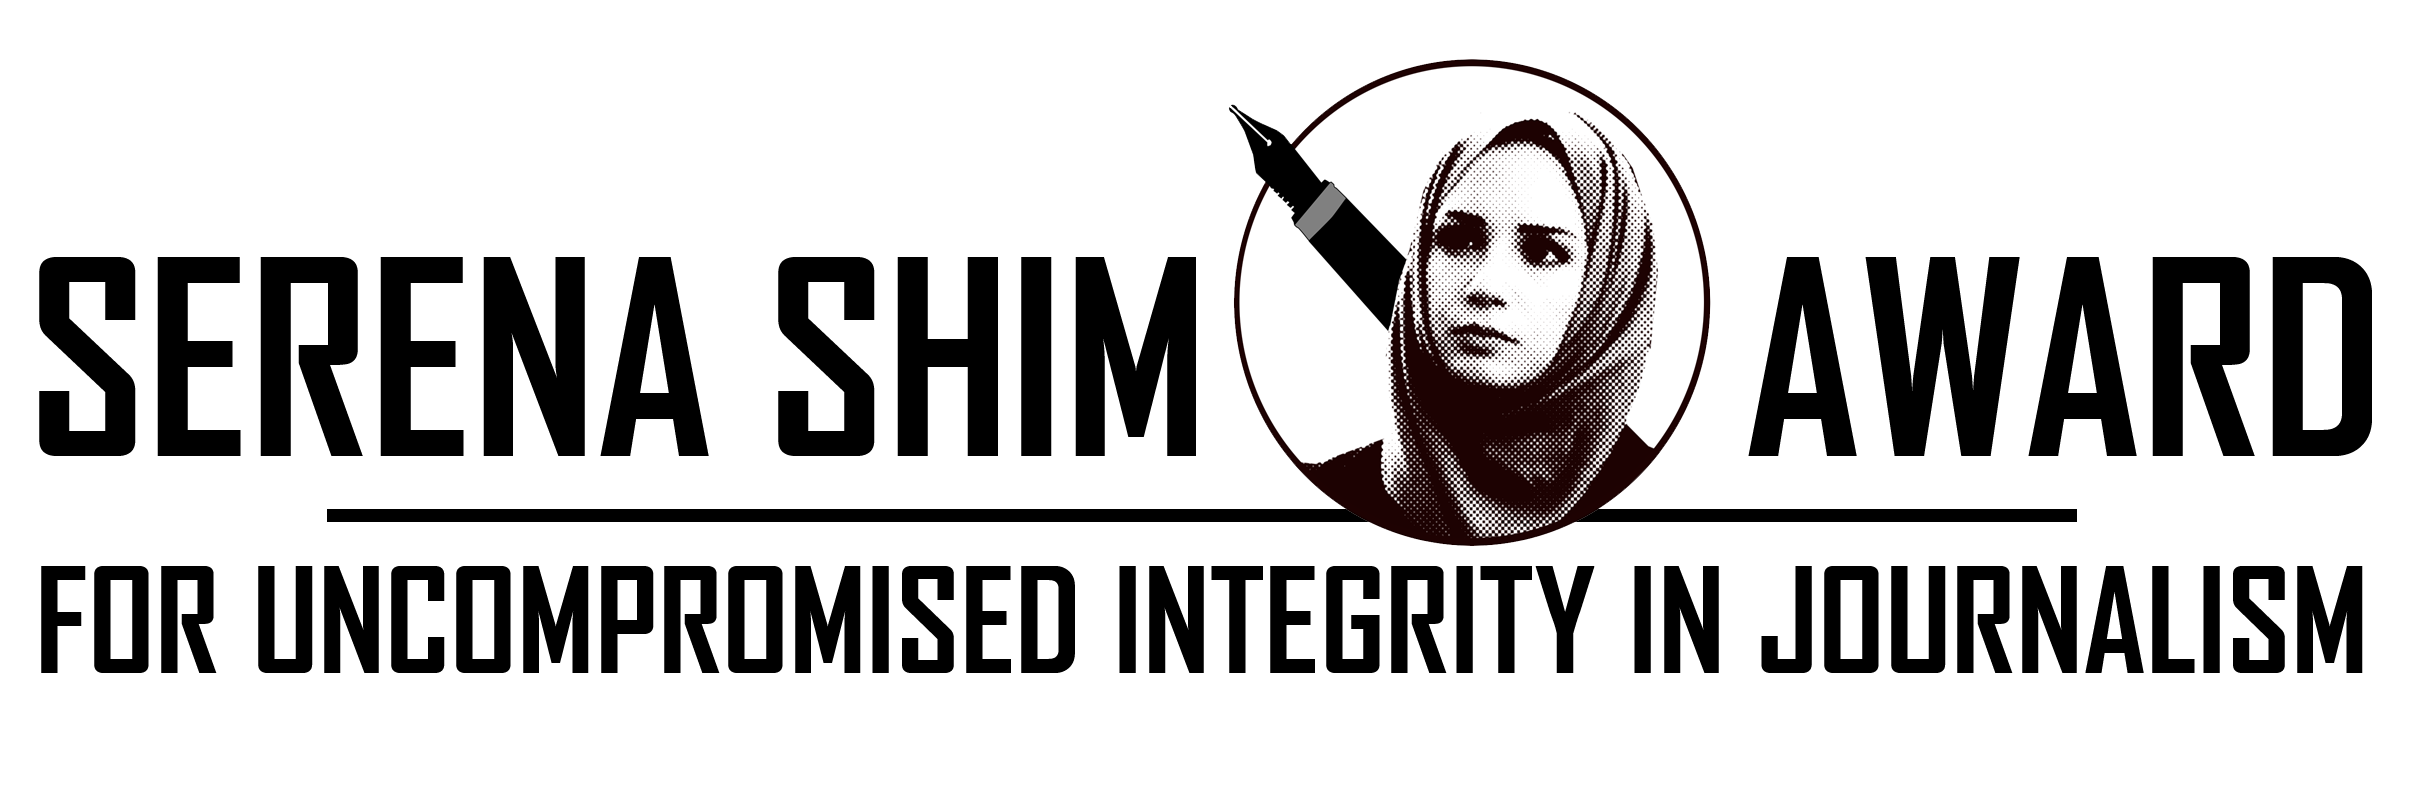 Serena Shim Award for Uncompromised Integrity in Journalism